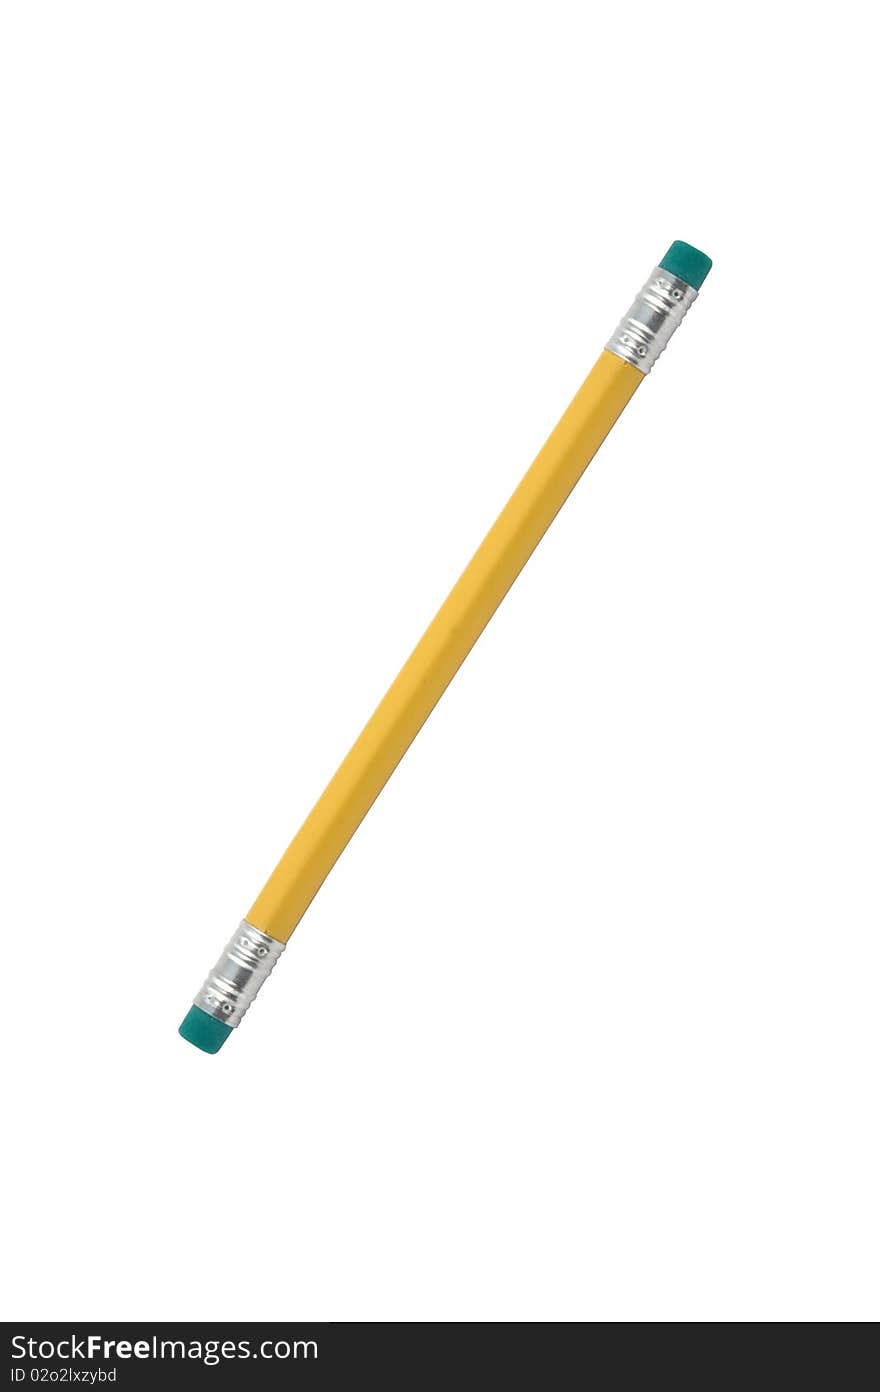 Pencil with two erasers, yellow body and green erasers.